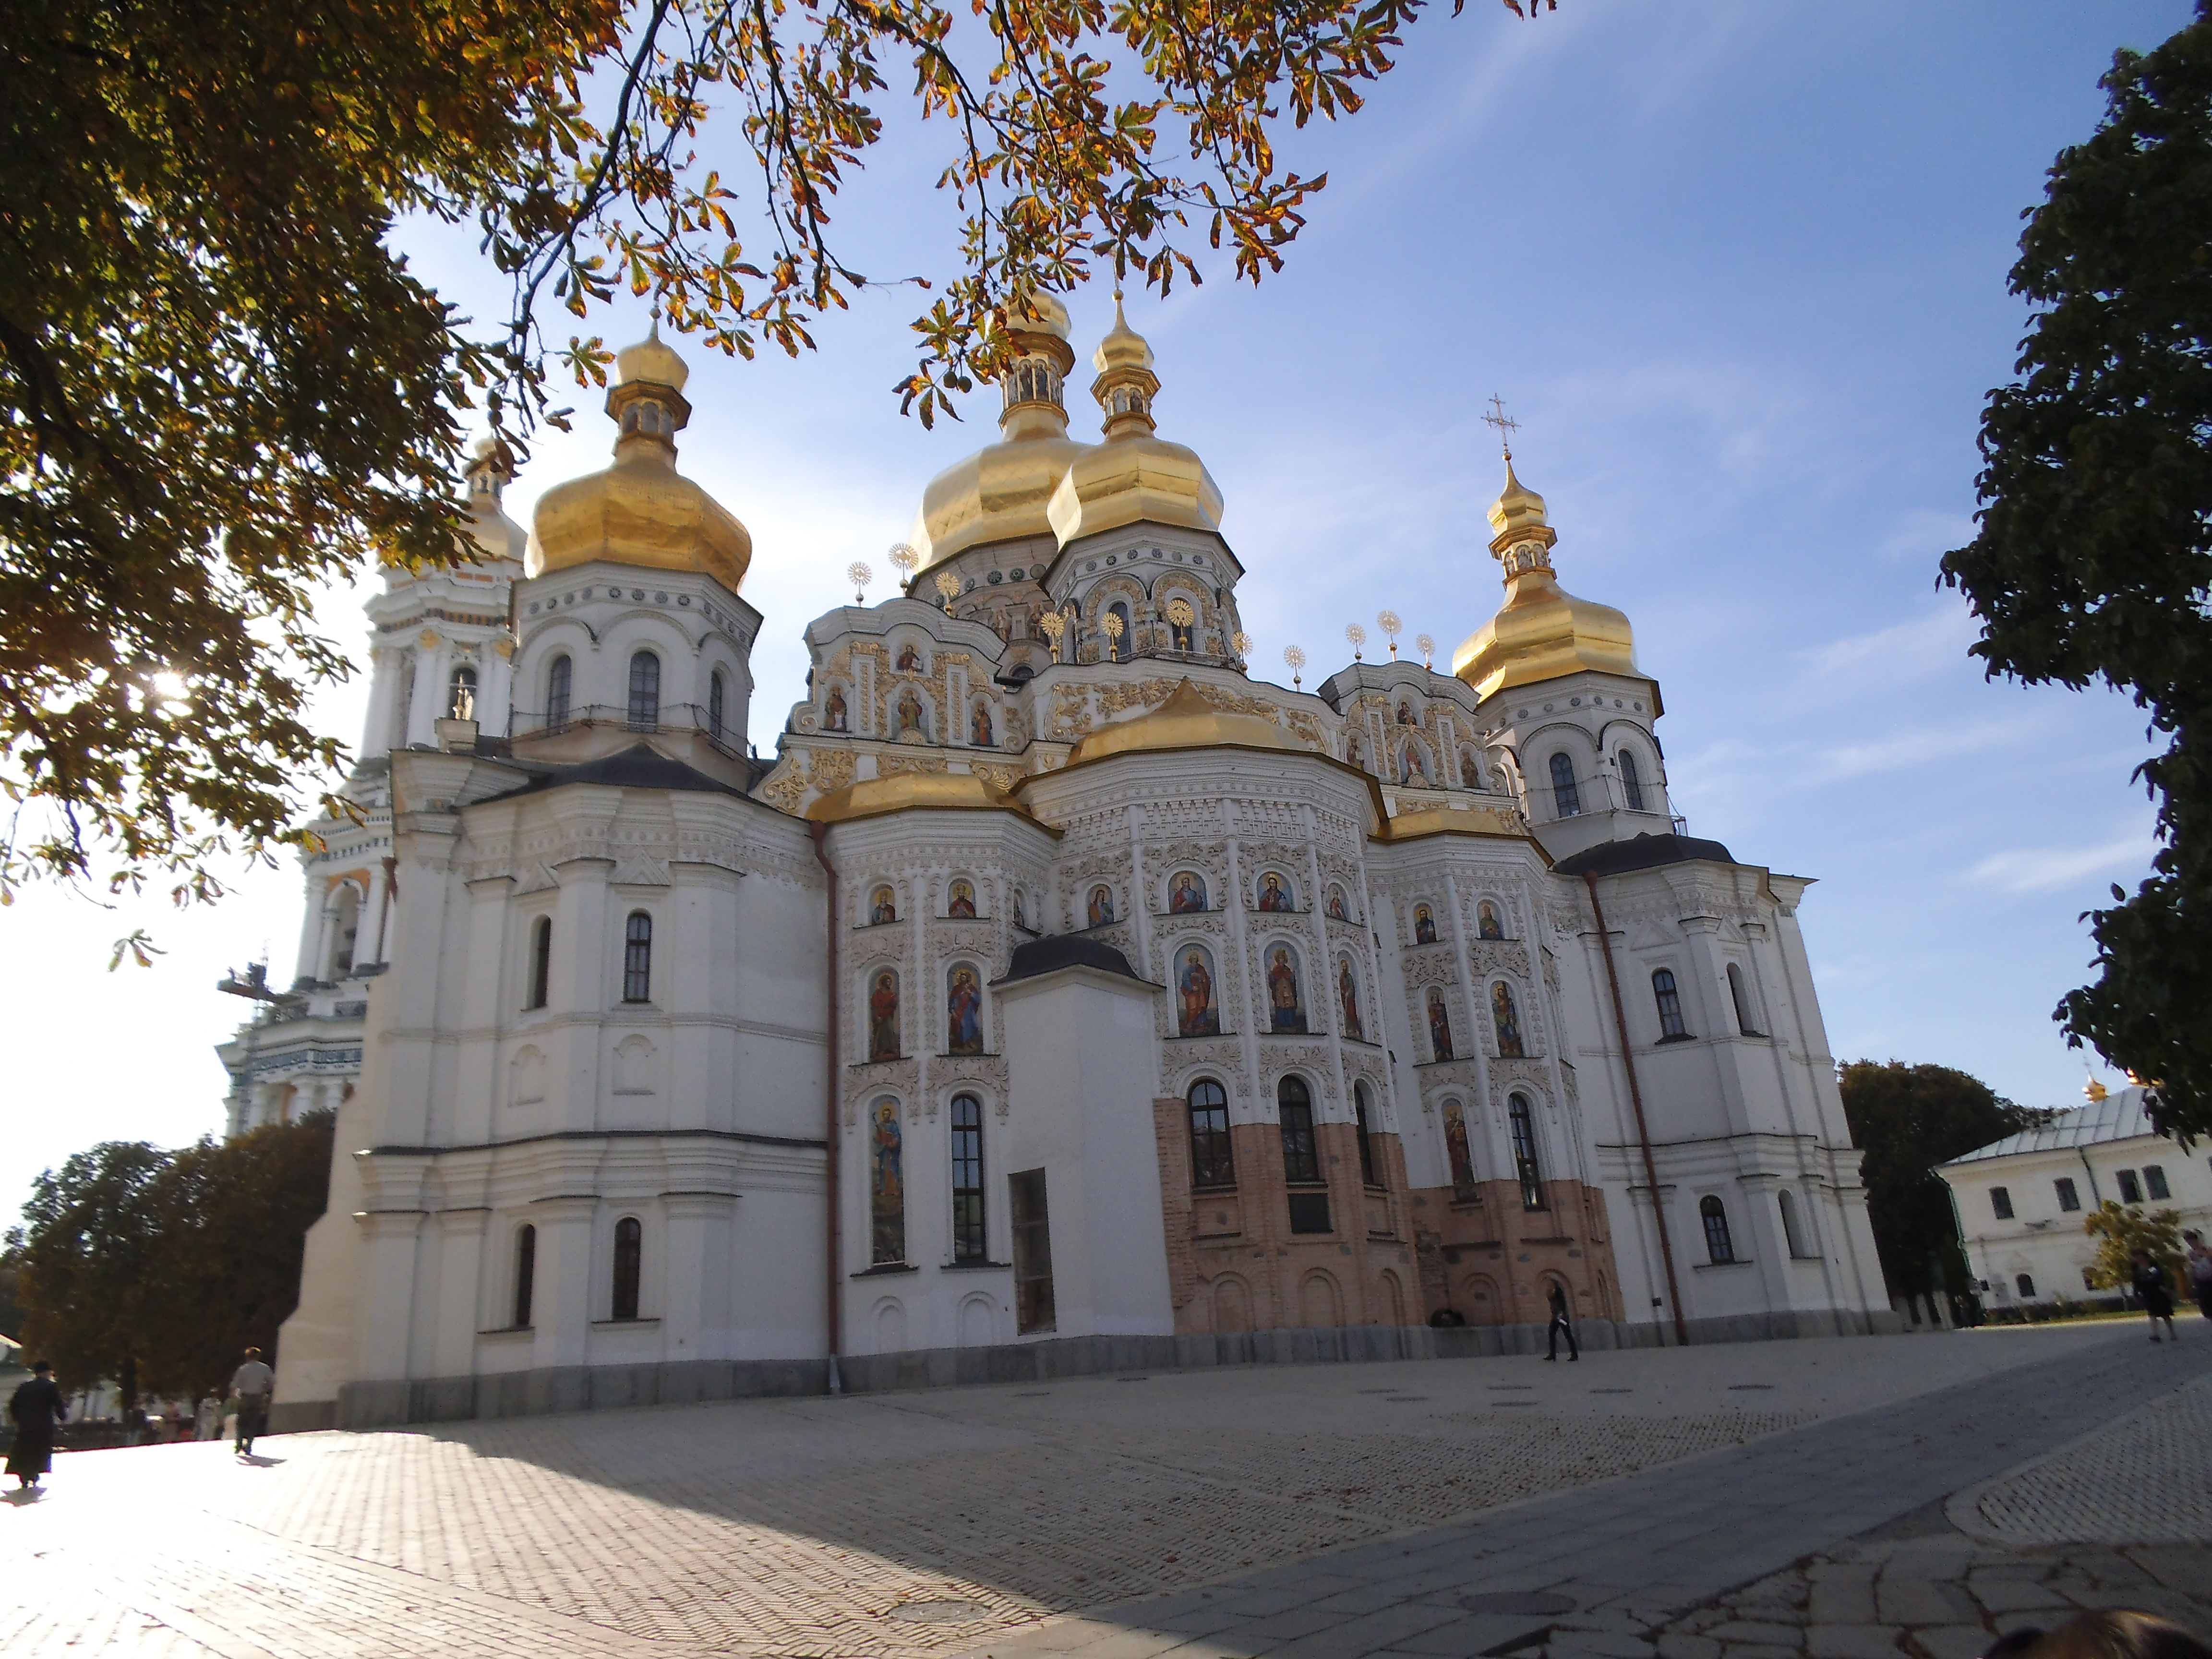 One of the faous churches of the Pecherska Lavra in Kiev